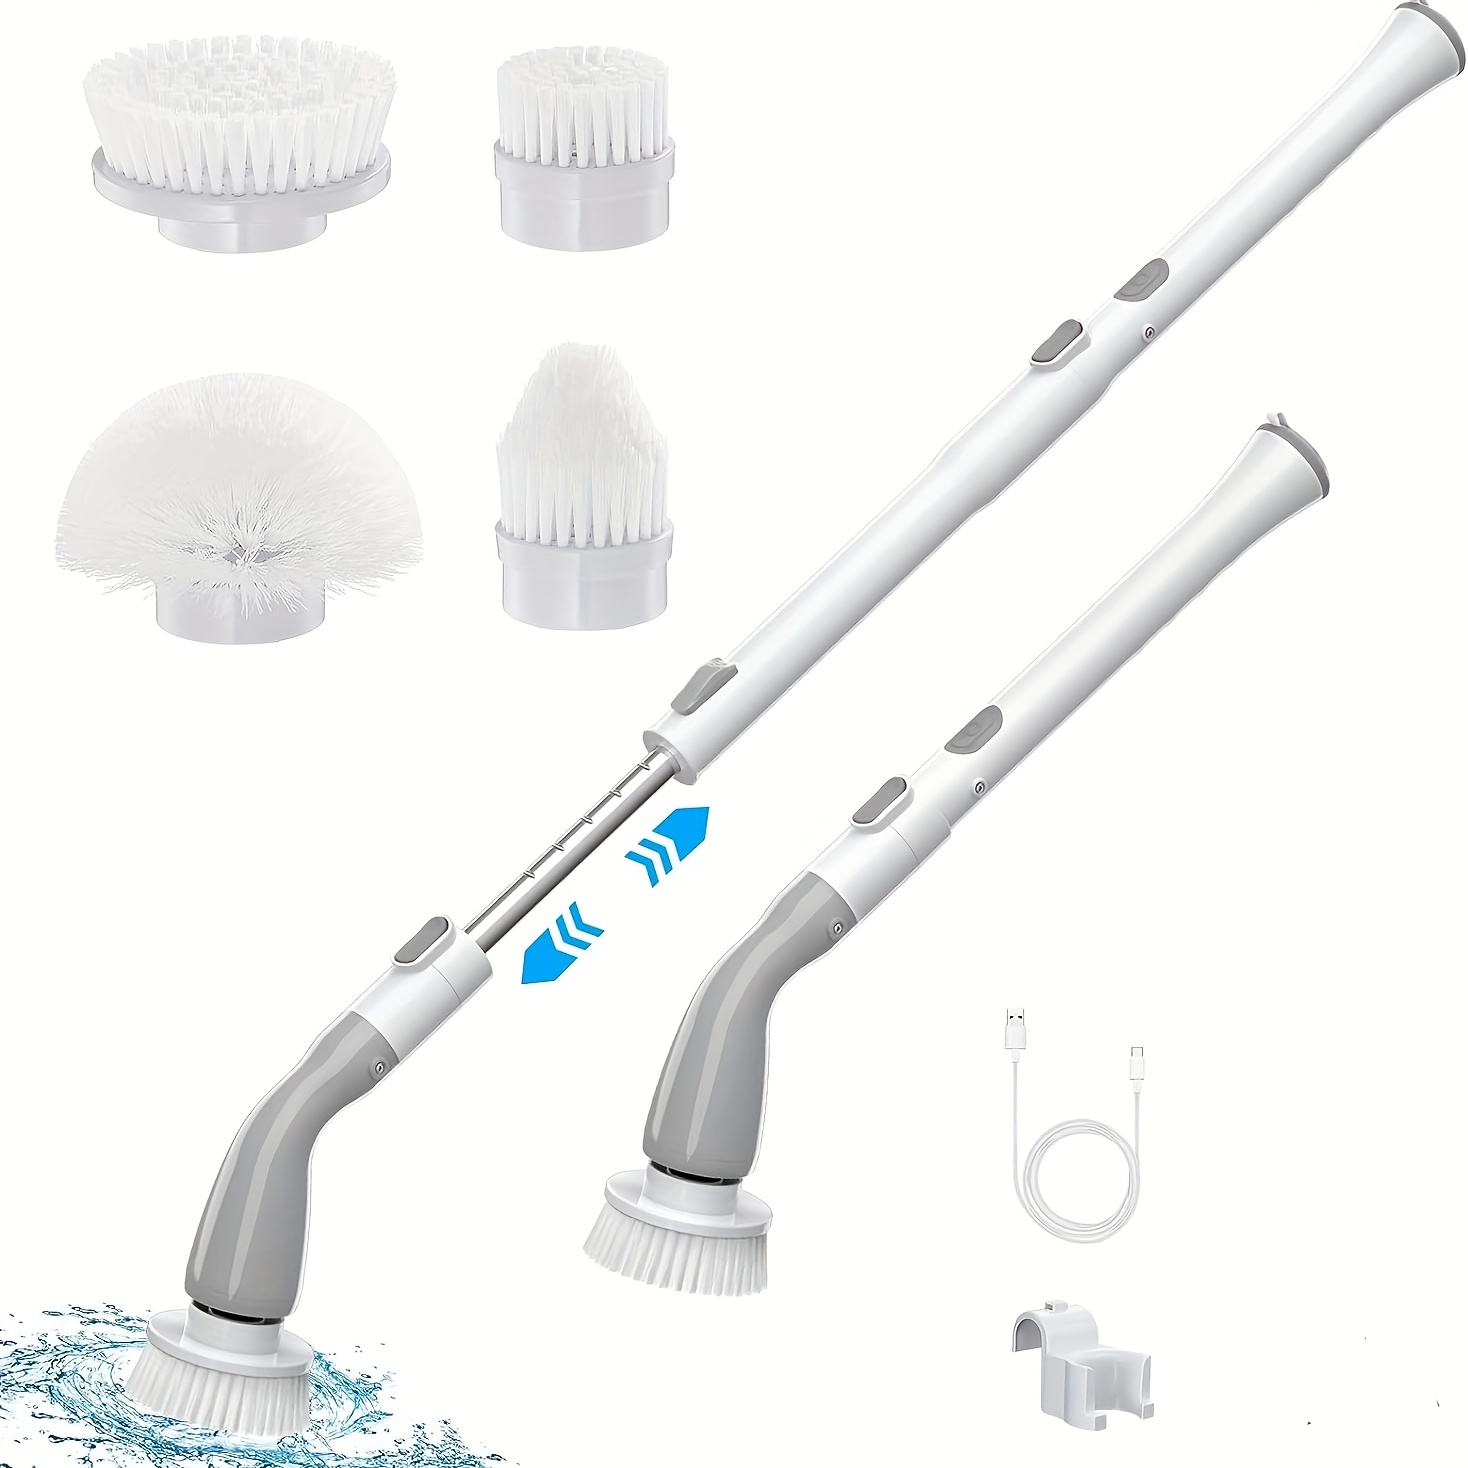 Electric Spin Scrubber, Cordless Cleaning Brush 6 Replaceable Brushes, Shower Scrubber Bathroom Scrubber Adjustable Extension Handle, Power Scrubber